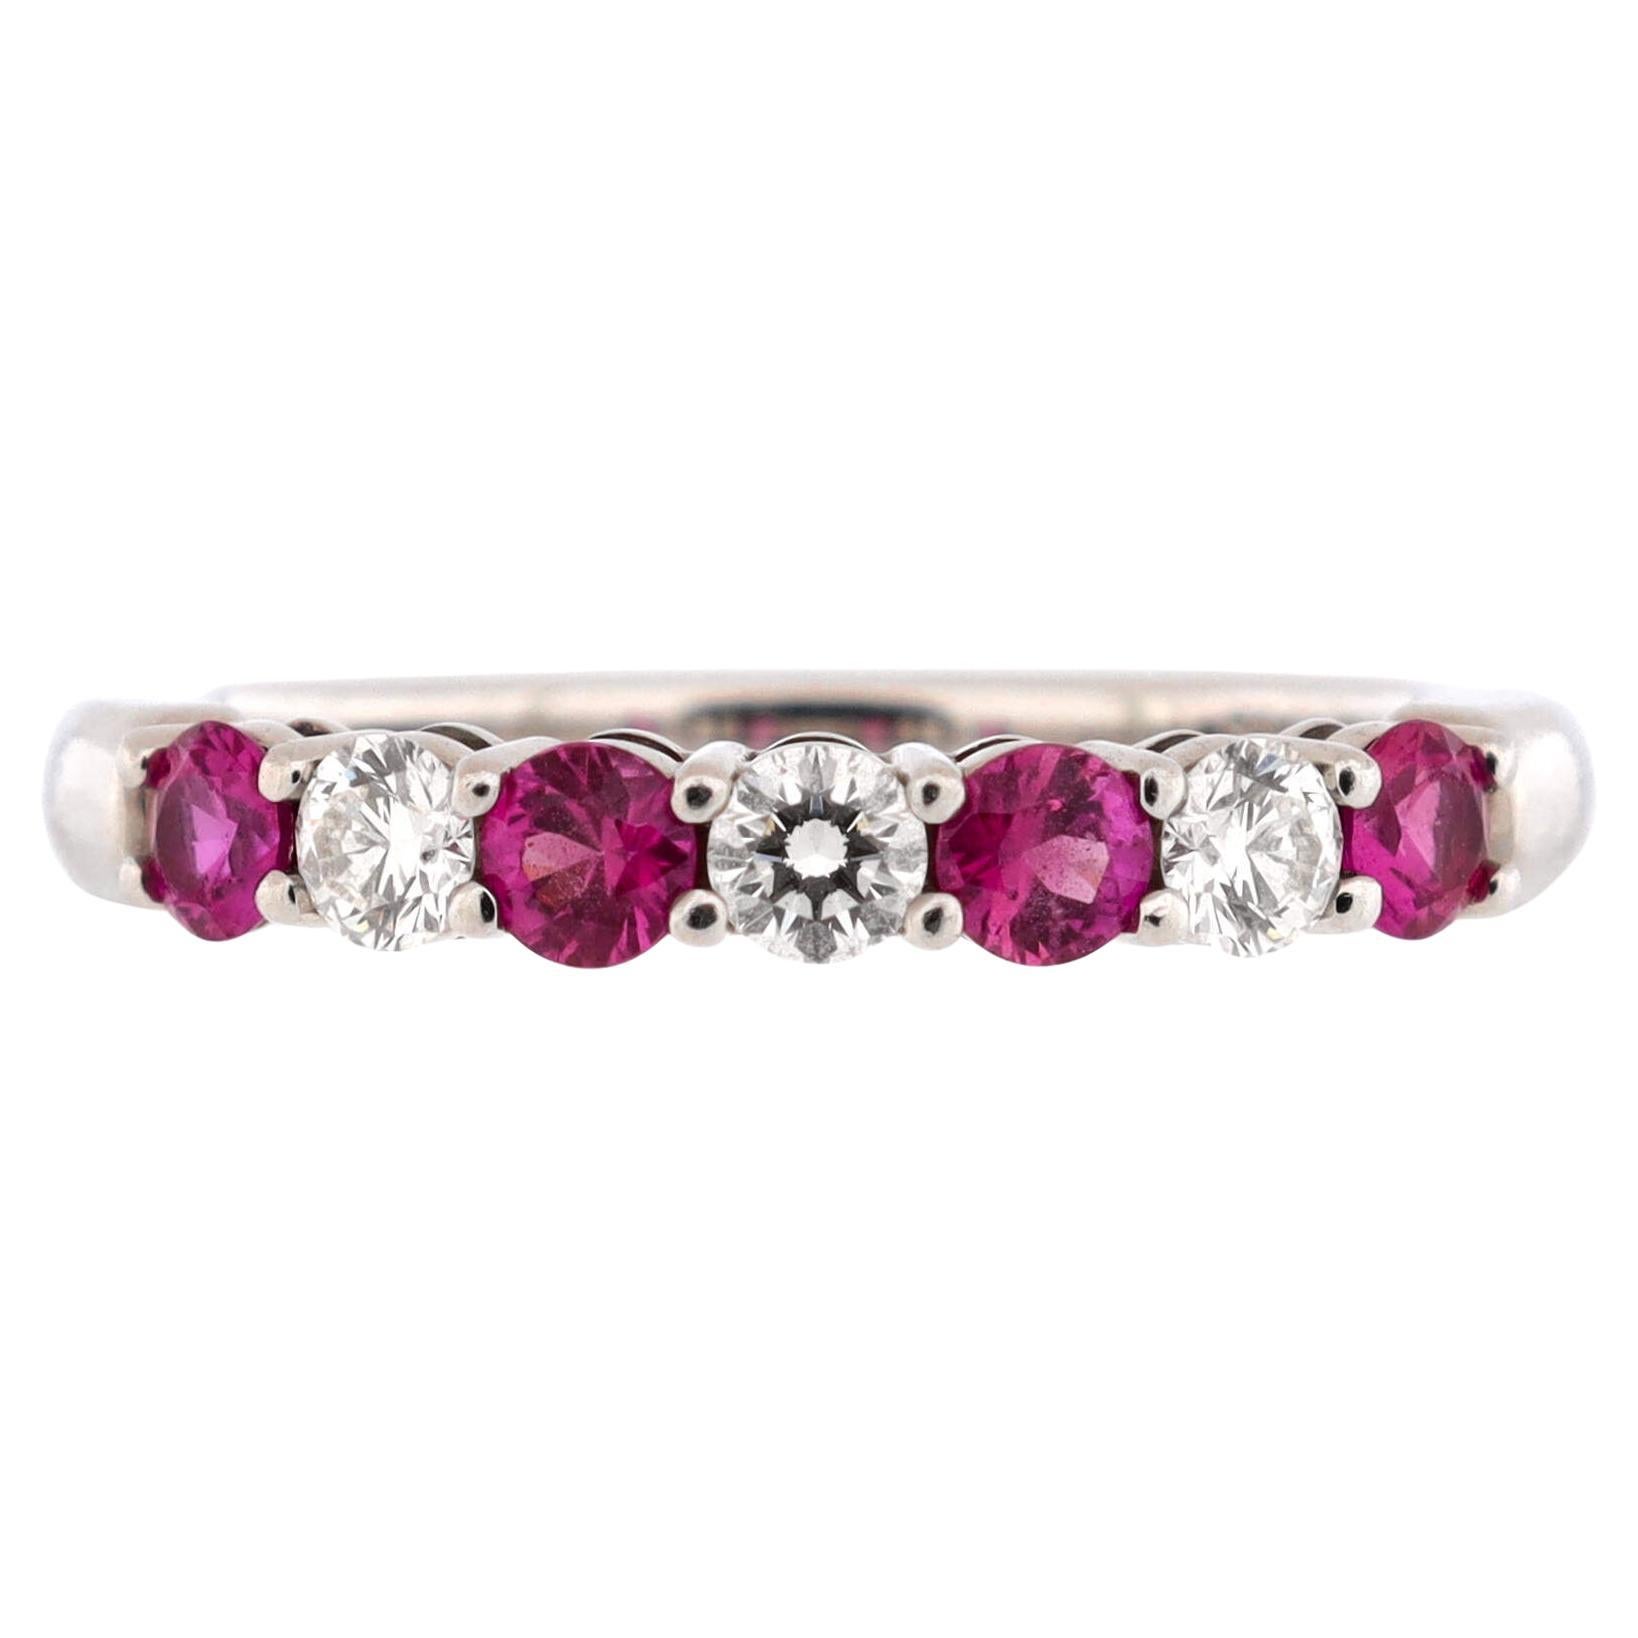 Tiffany & Co. Half Embrace Band Ring Platinum with Diamonds and Pink Sapphires